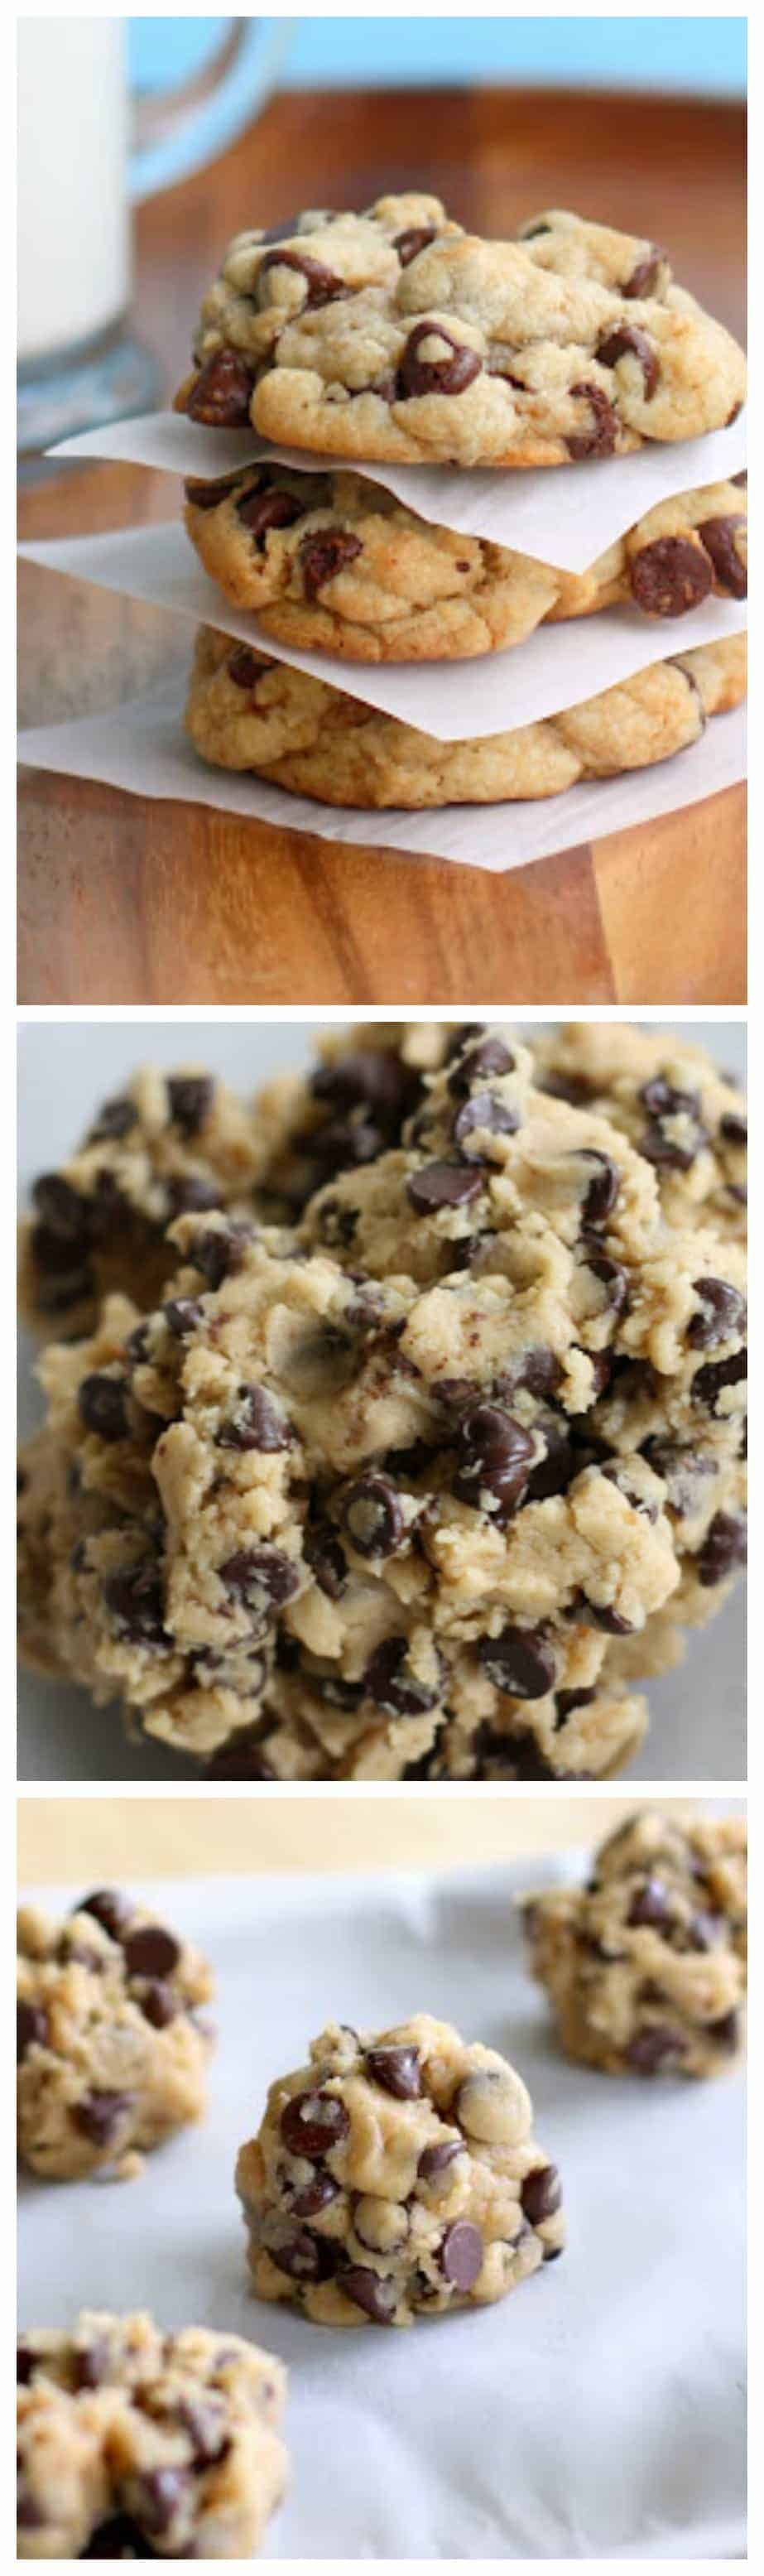 My Big Fat, Chewy Chocolate Chip Cookies - tried and true chocolate chip cookies. Once you try these you are done looking for a chocolate chip cookie recipe. #soft #chocolatechipcookies #chocolate #dessert #cookies